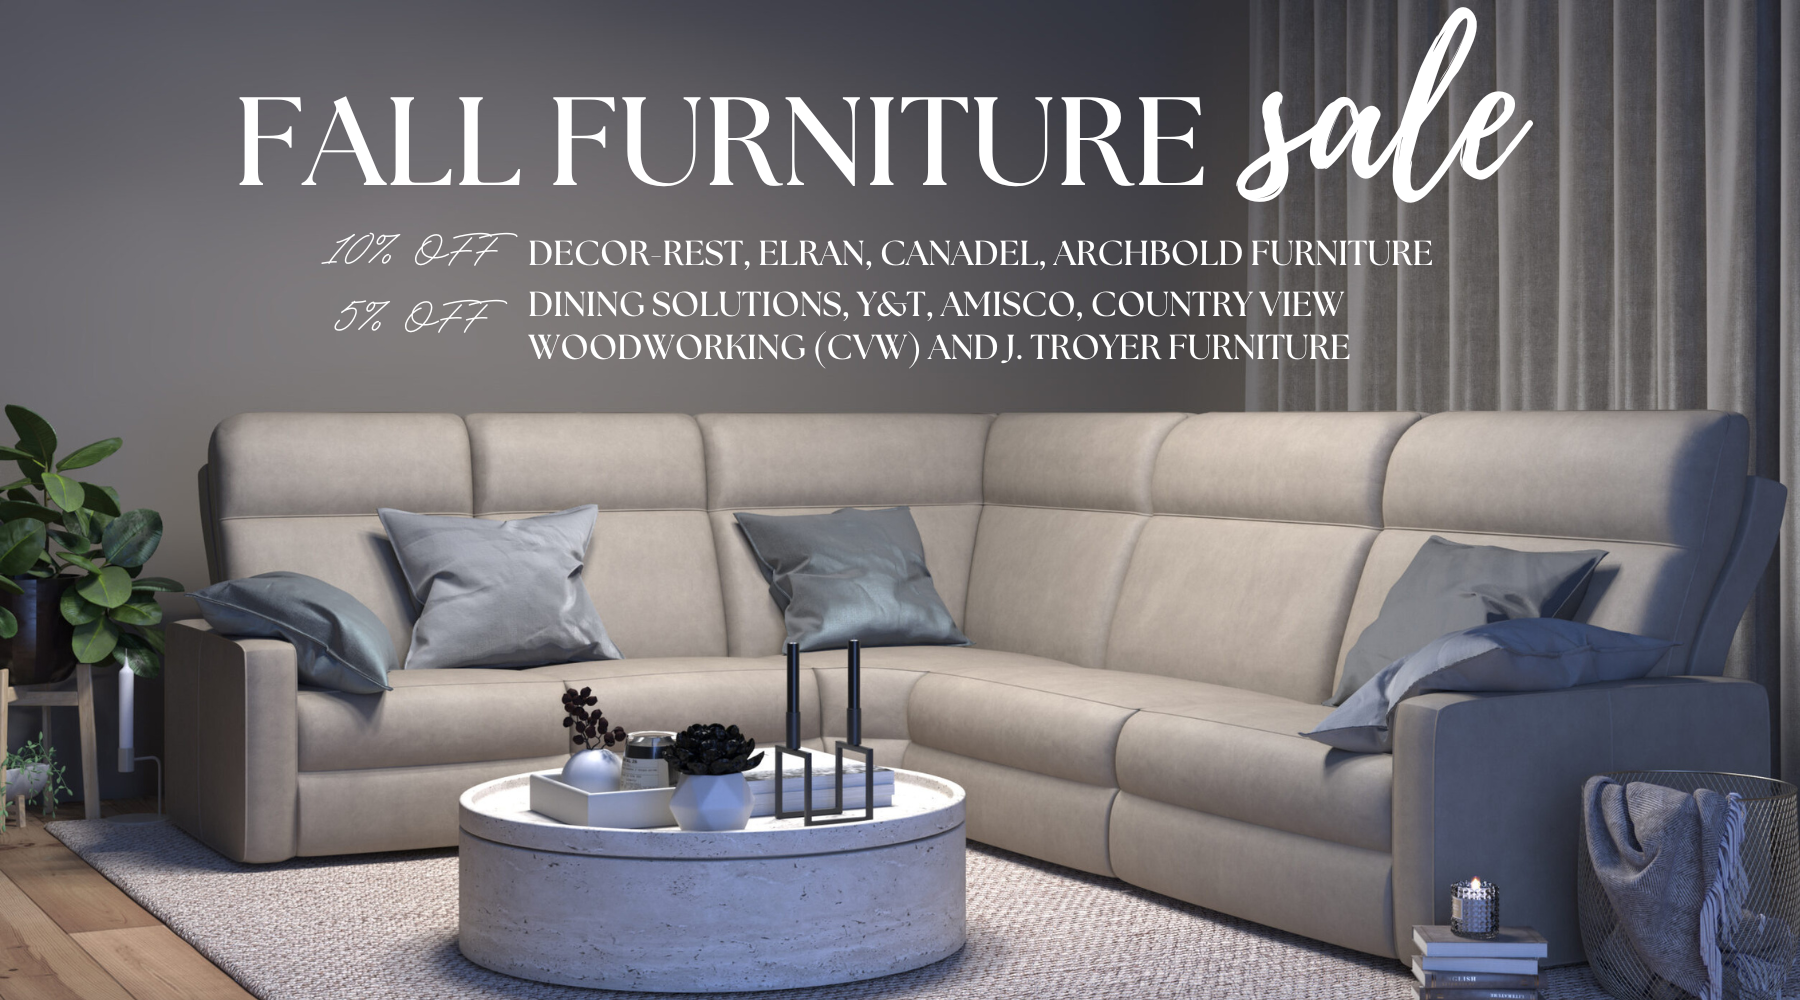 Smith Brothers Furniture Sale